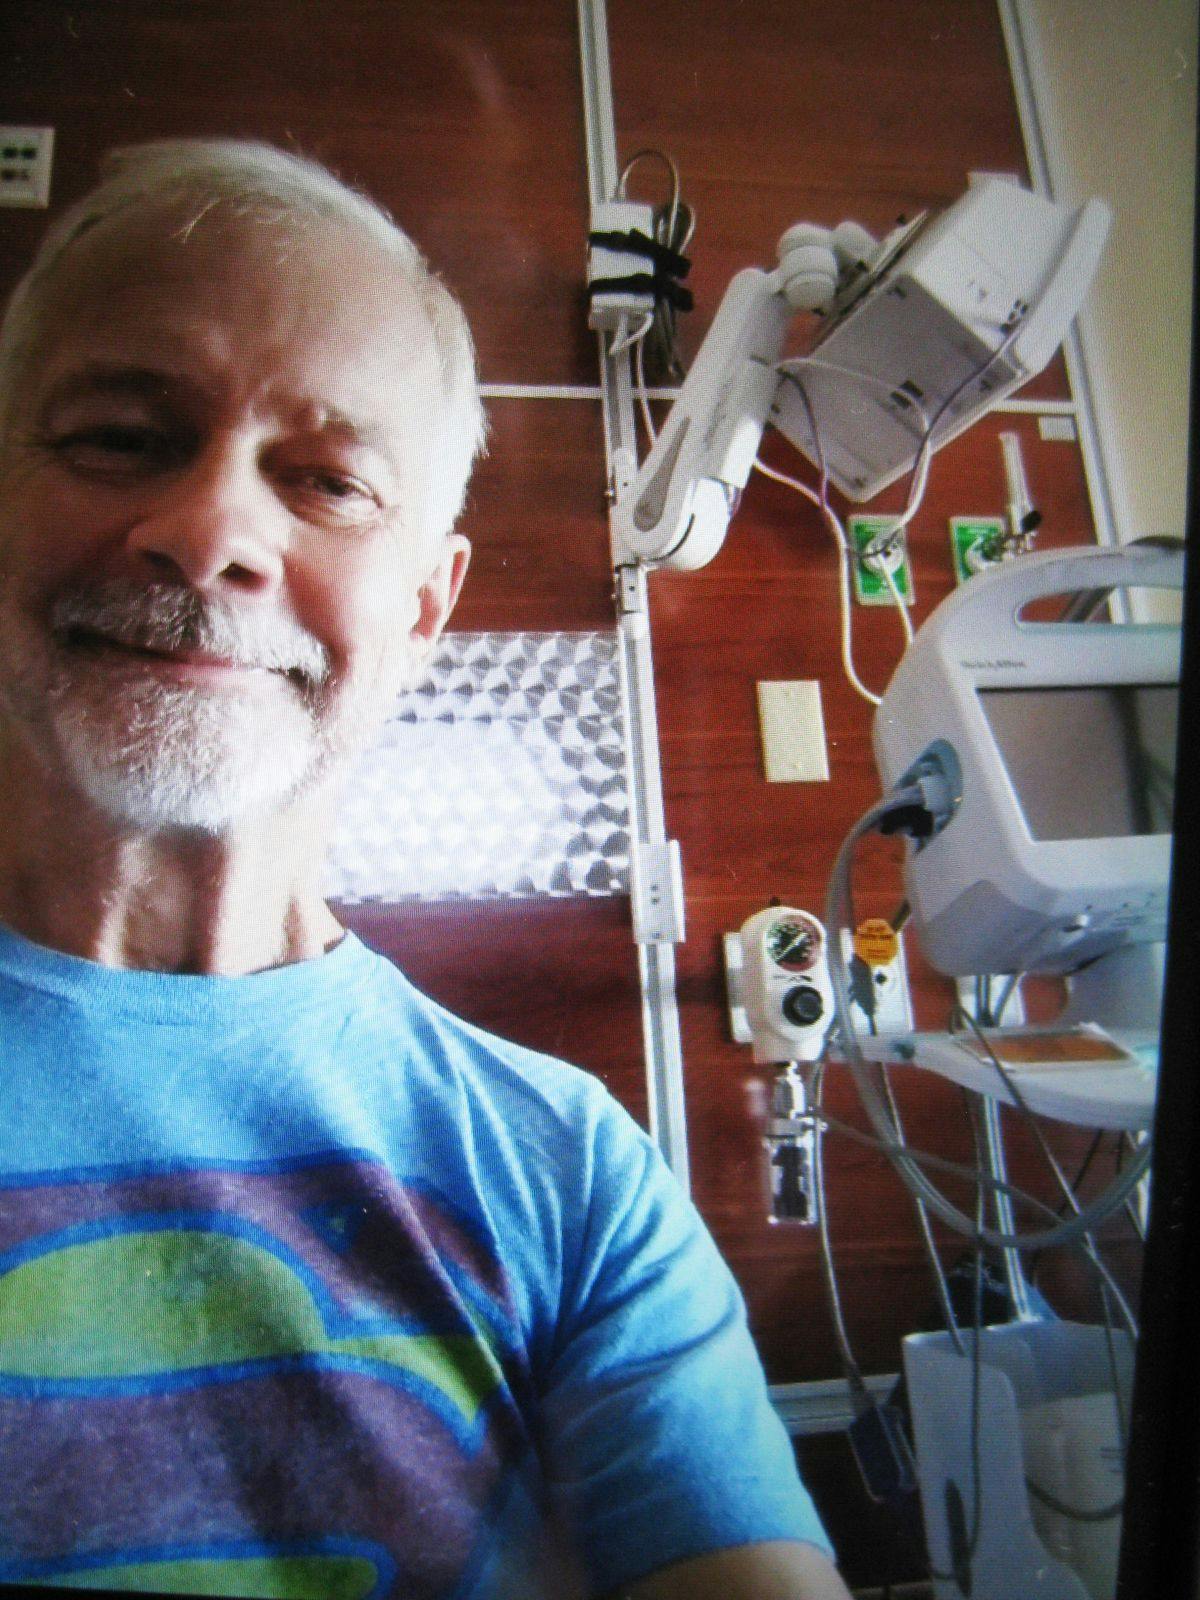 John Smelcer at his first chemotherapy appointment